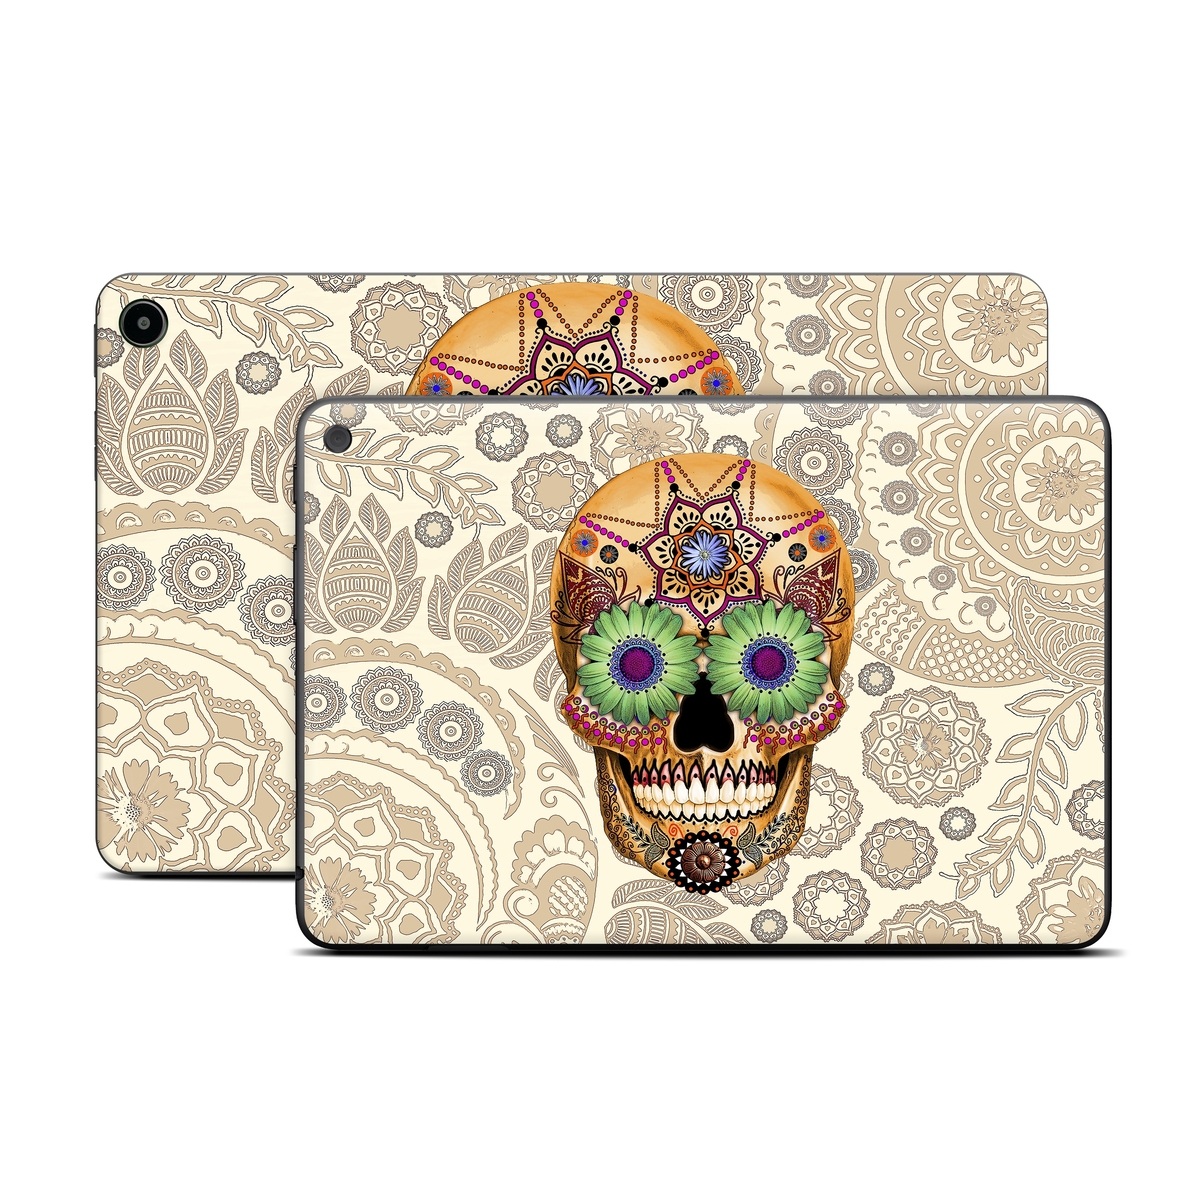 Amazon Fire Tablet Series Skin Skin design of Skull, Bone, Pattern, Design, Illustration, Visual arts, Fashion accessory, Art, with gray, yellow, green, black, red, pink colors